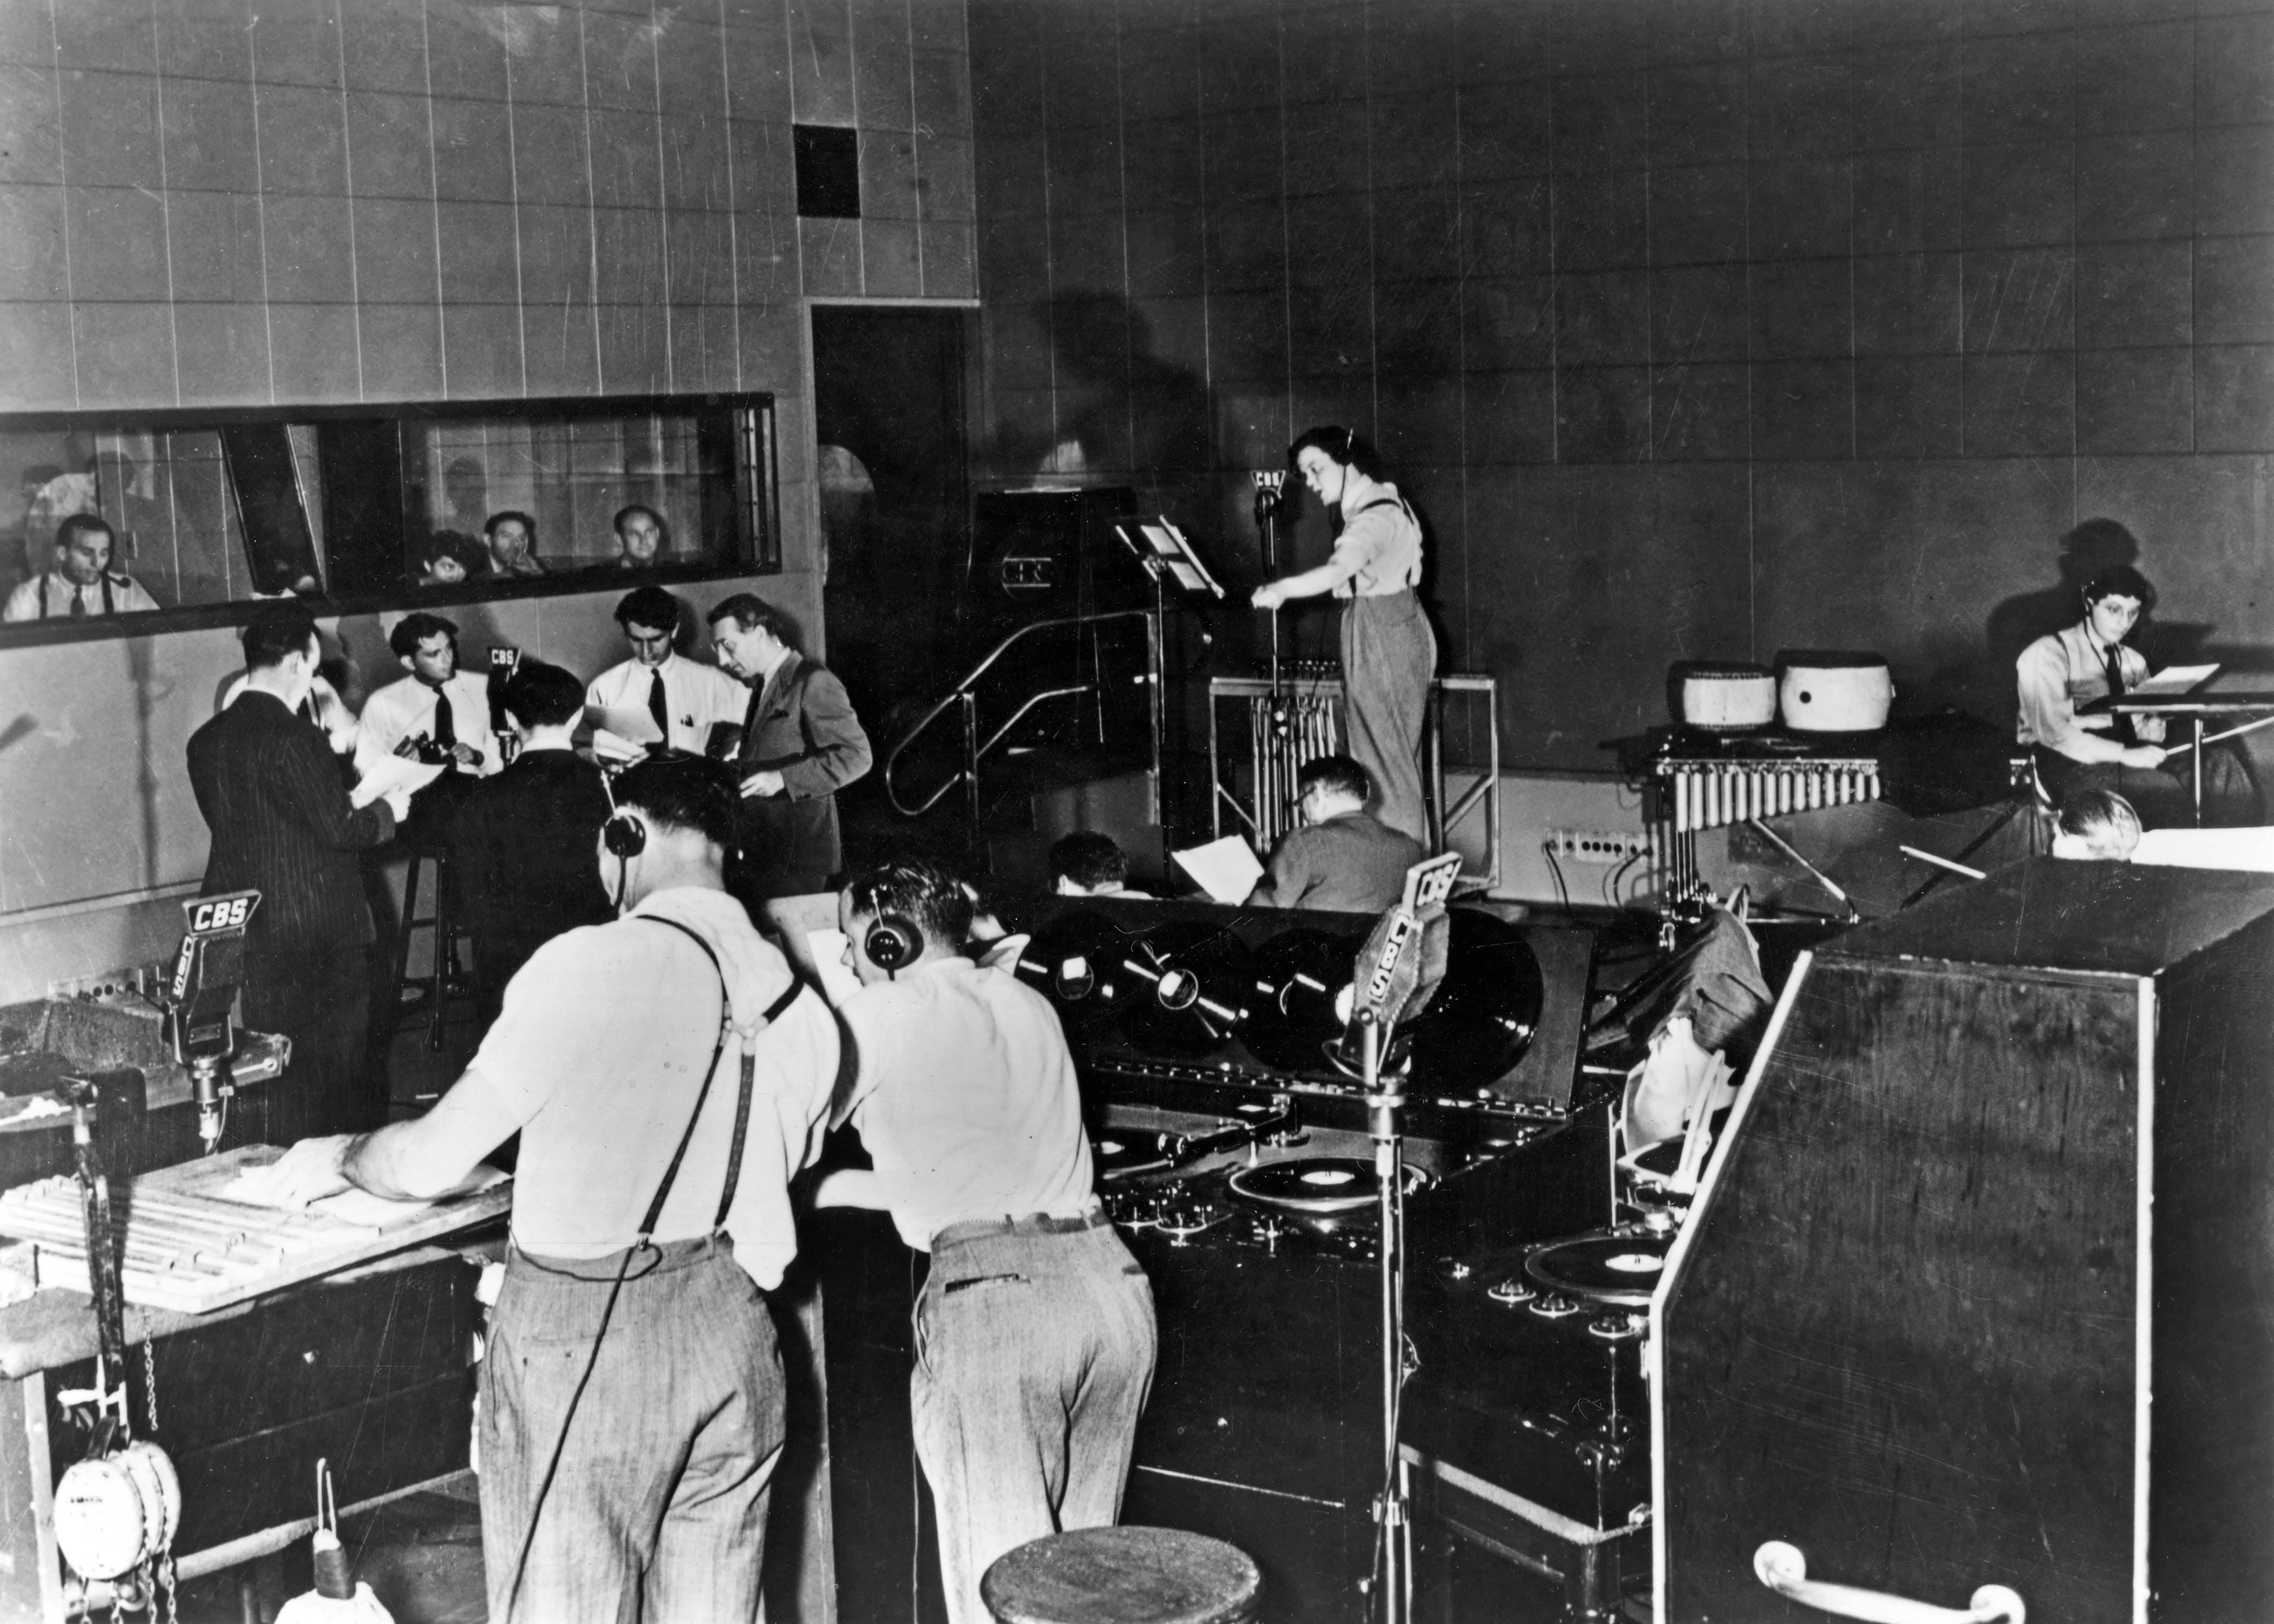 Orson Welles, 1938 Shown in rehearsal, standing, center background: director Orson Welles; seated, right: composer Bernard Herrmann NB: directing his Mercury Theatre of the Air troupe, such as created panic on the CBS radio broadcast of The War of the Worlds, October 30, 1938 (Photo Courtesy of Photofest, Inc.)